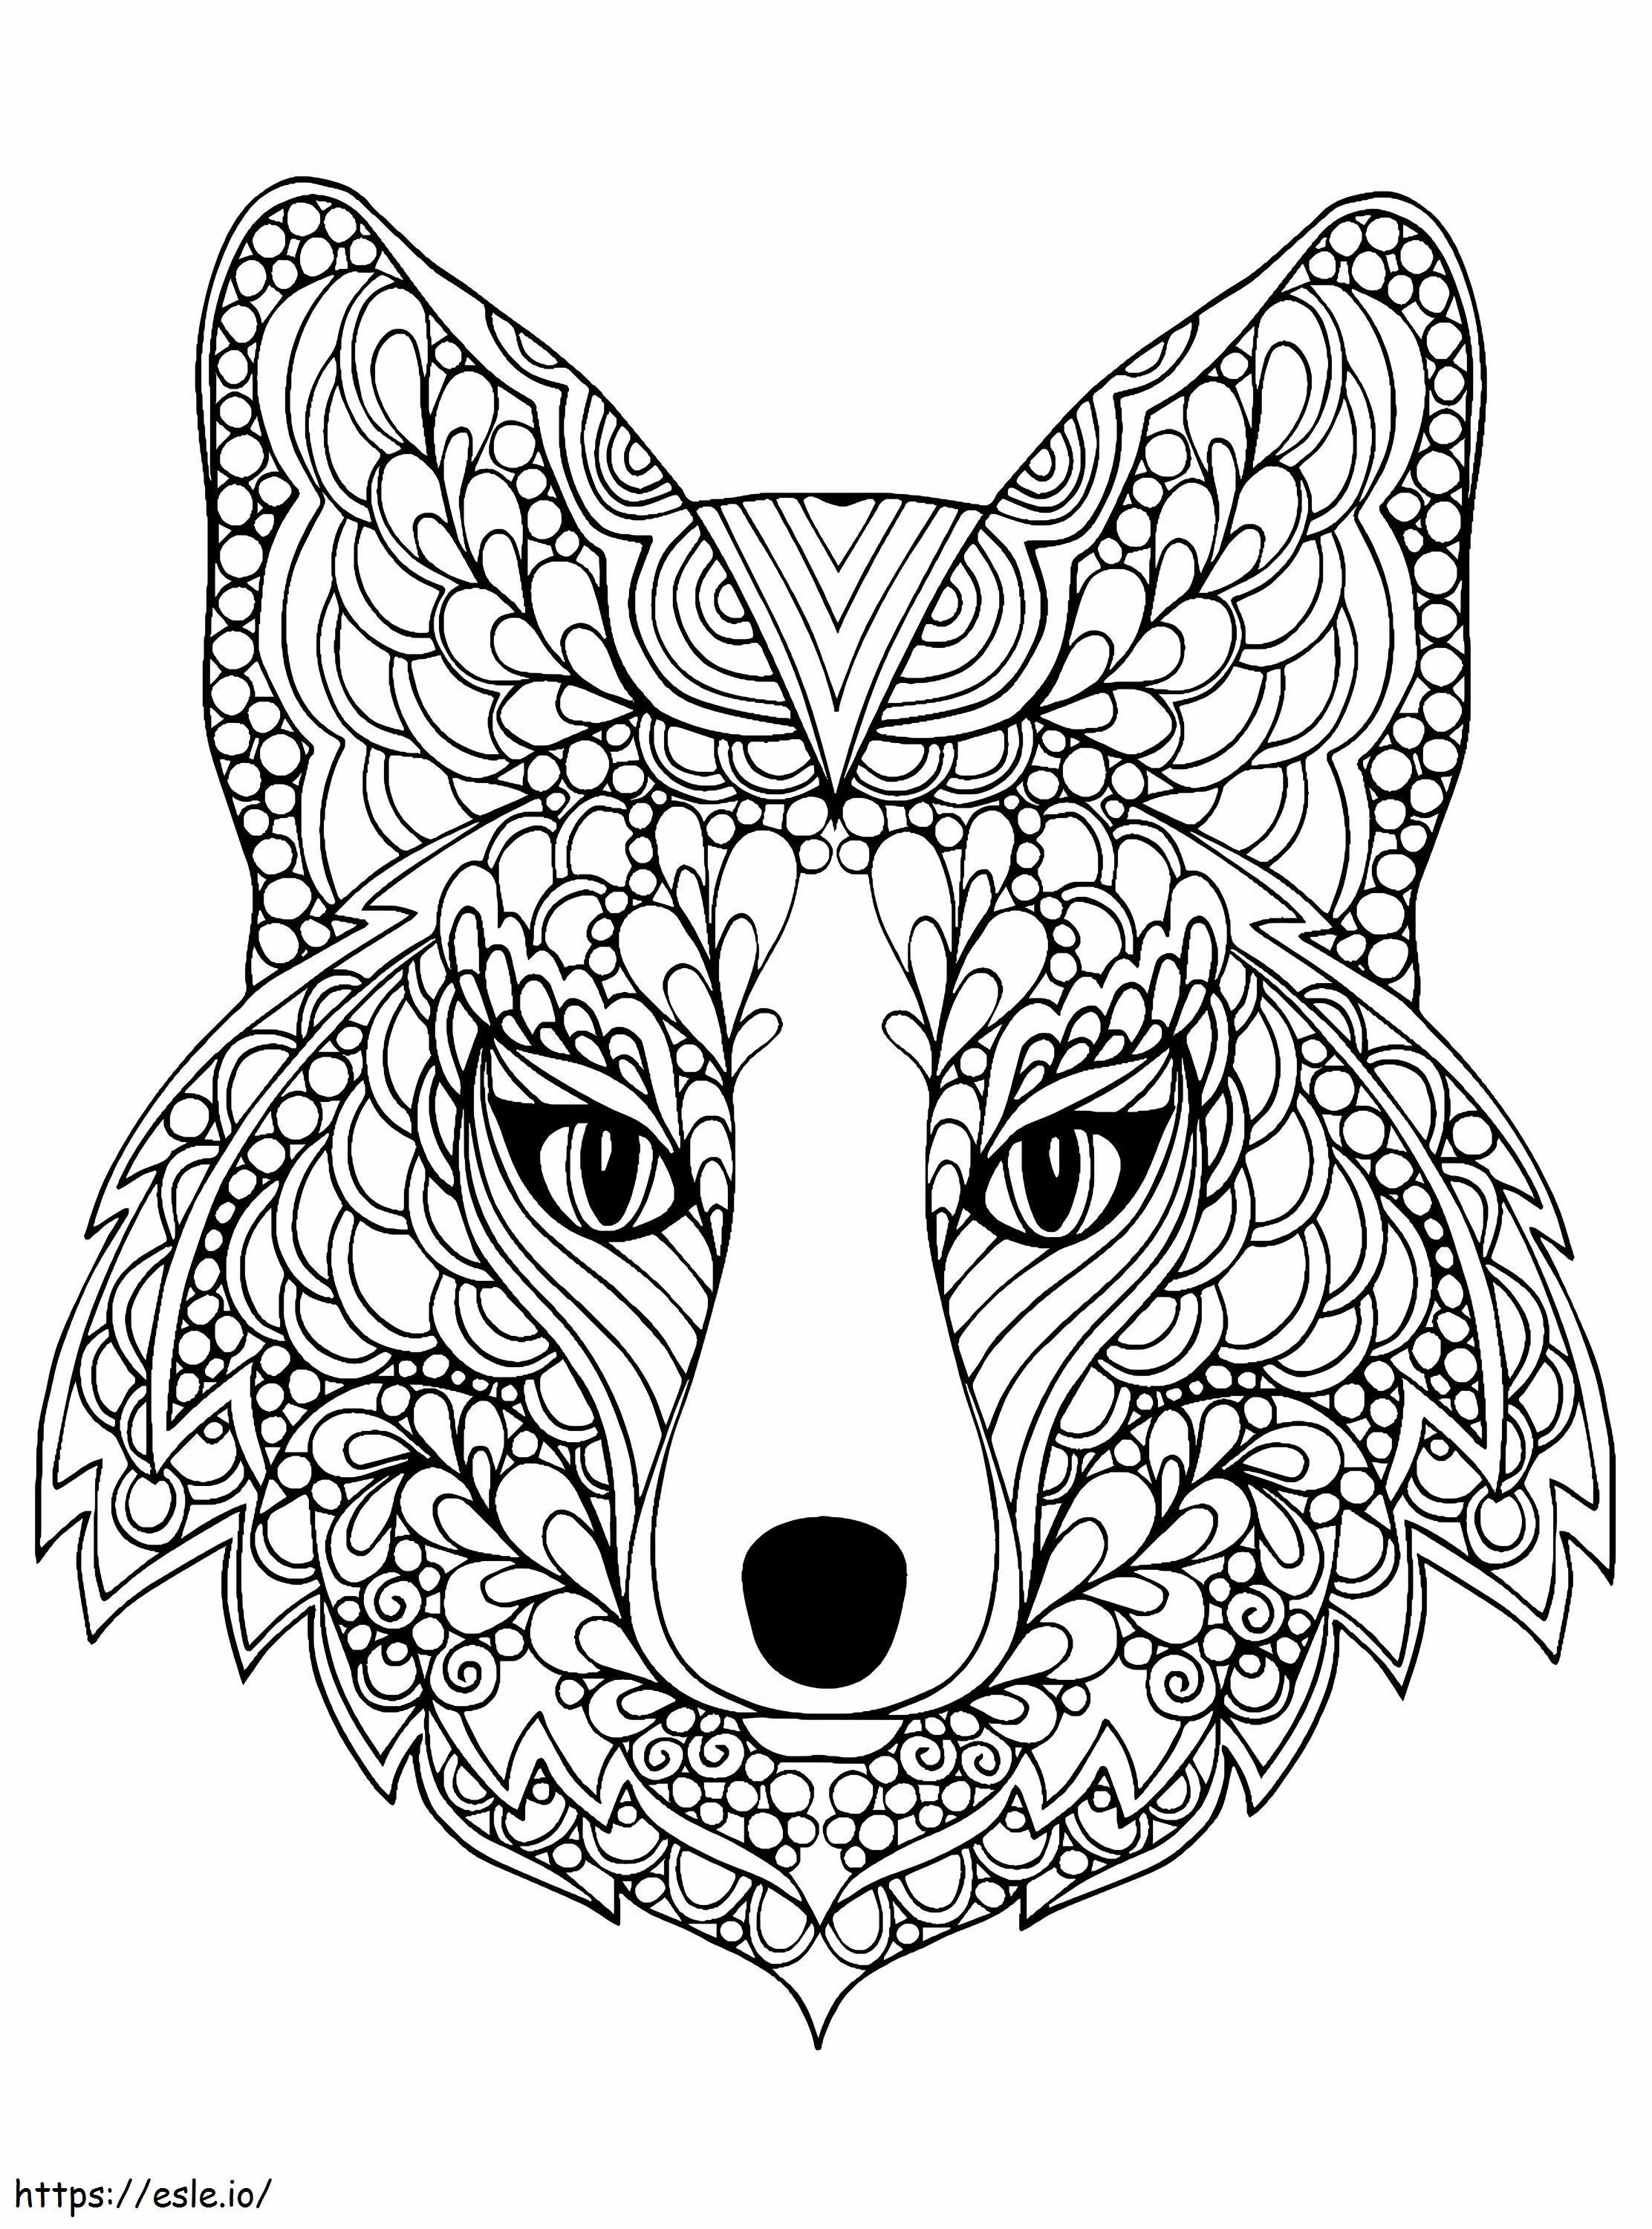 Beutiful Fox Head coloring page